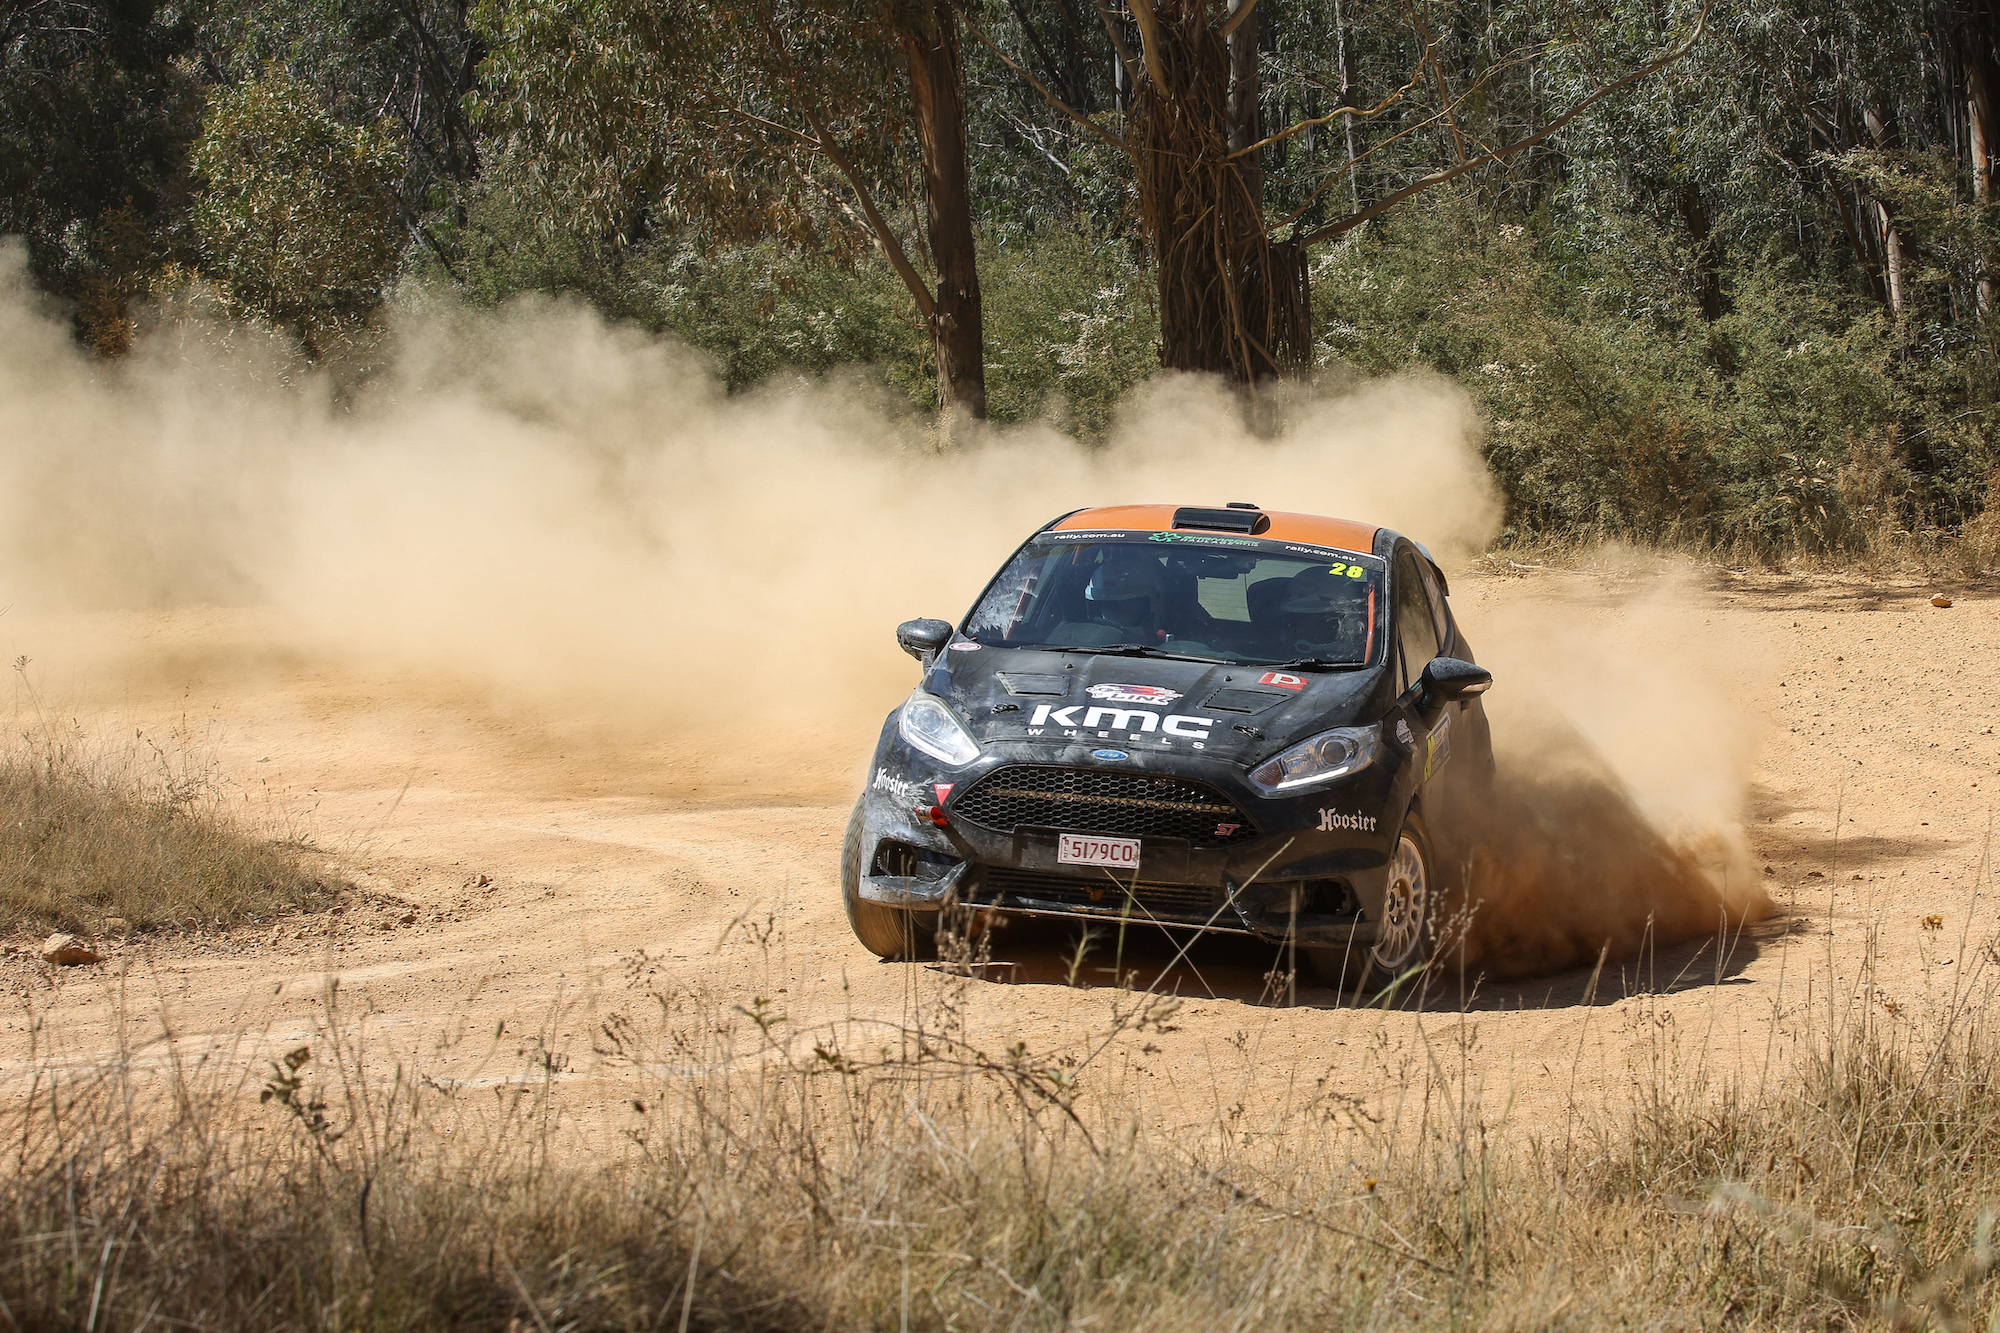 lewis and mcloughlin lead midway through dramatic canberra